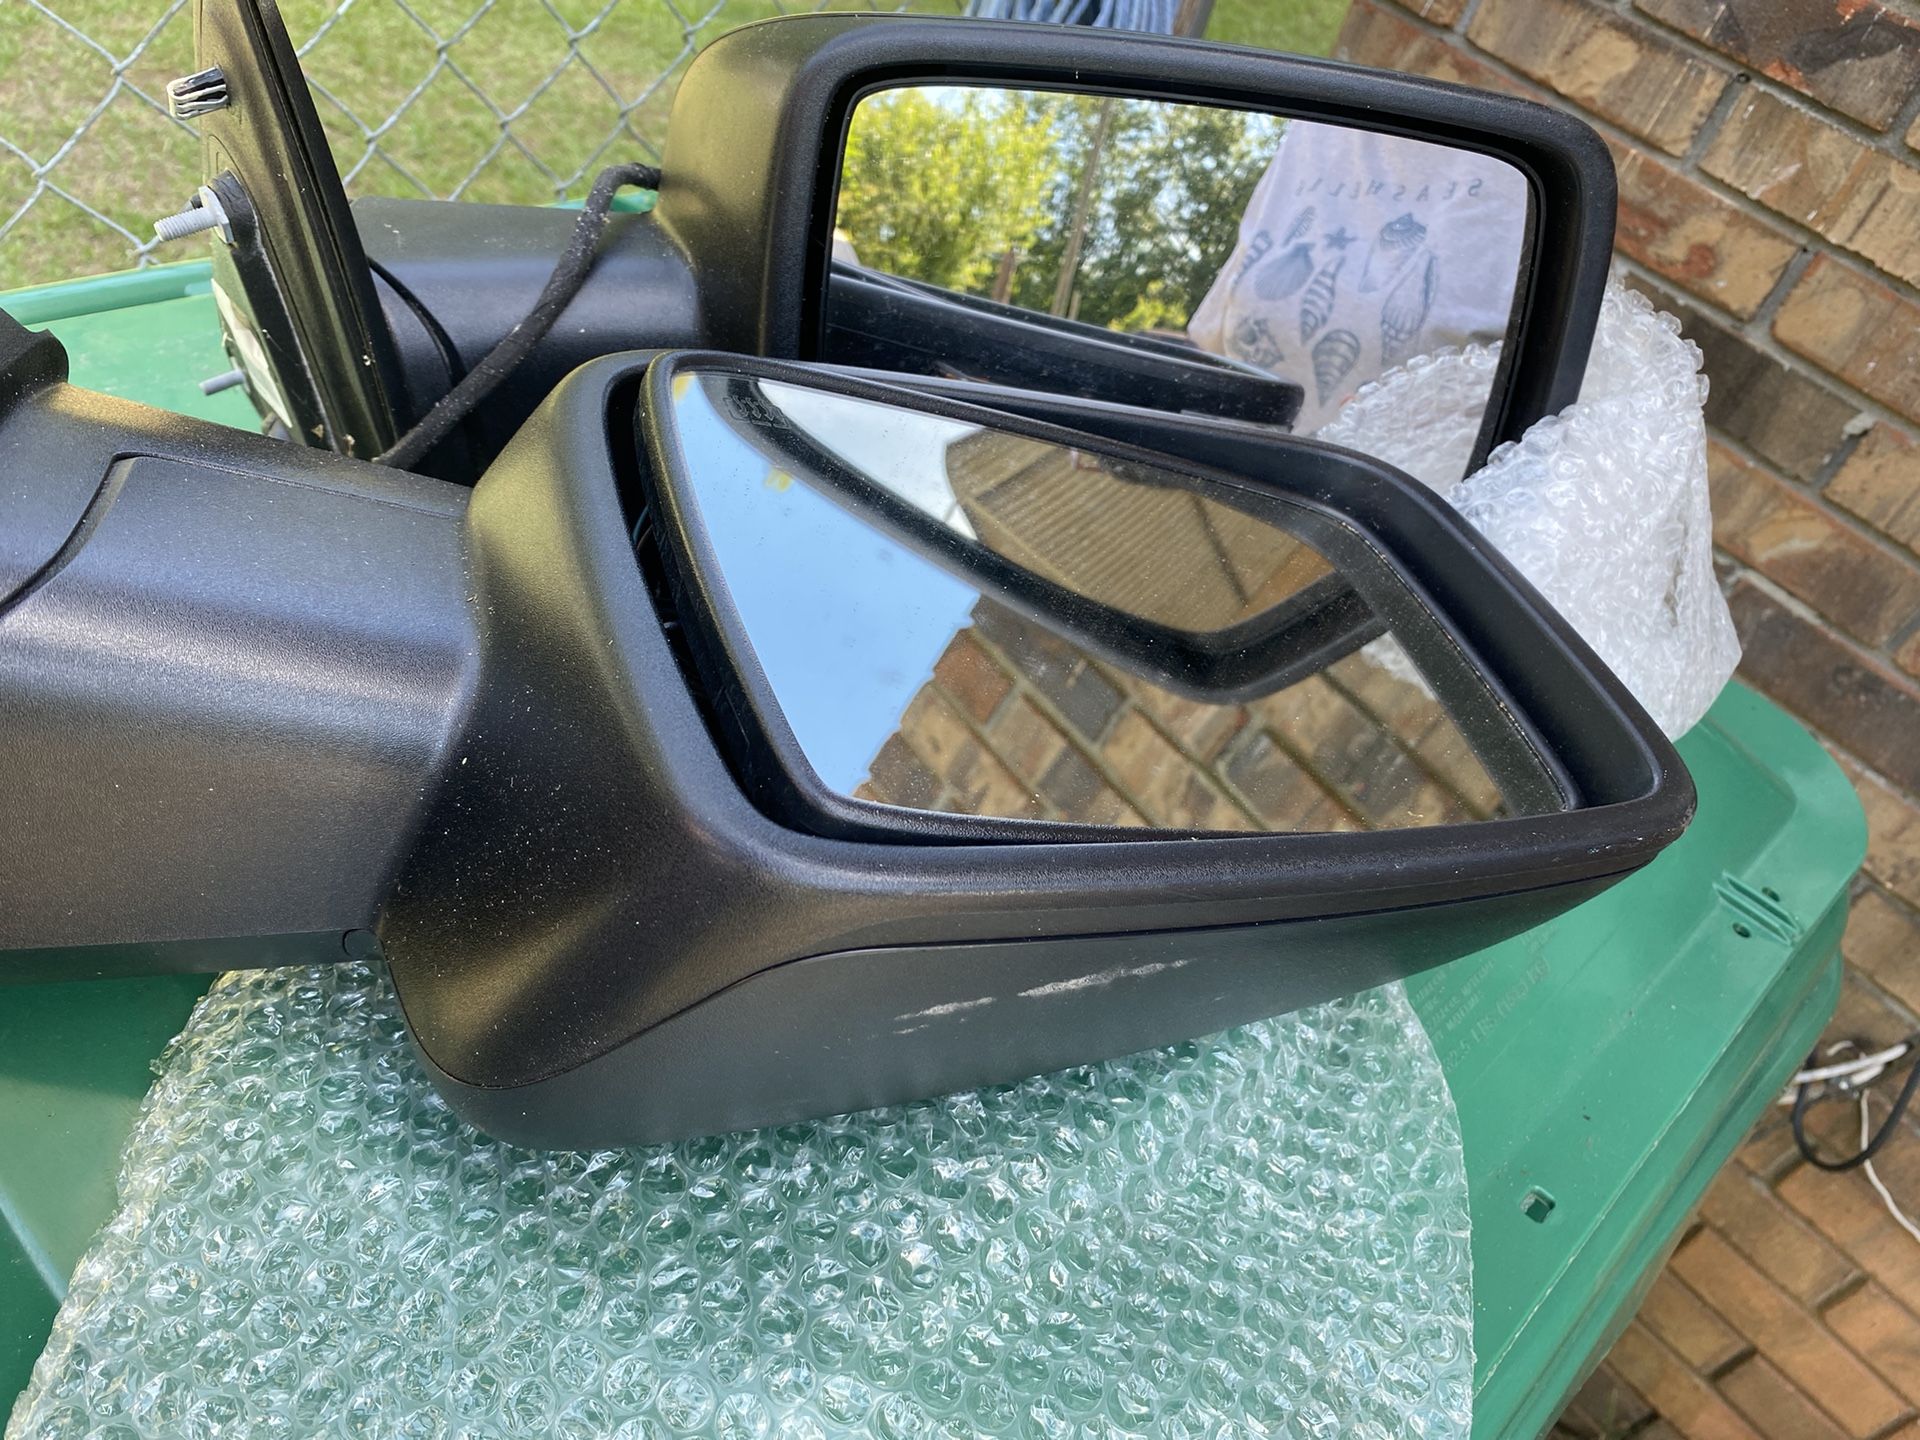 Driver and Passenger Ram 1500/3500Hd Power Mirrors in New Condition